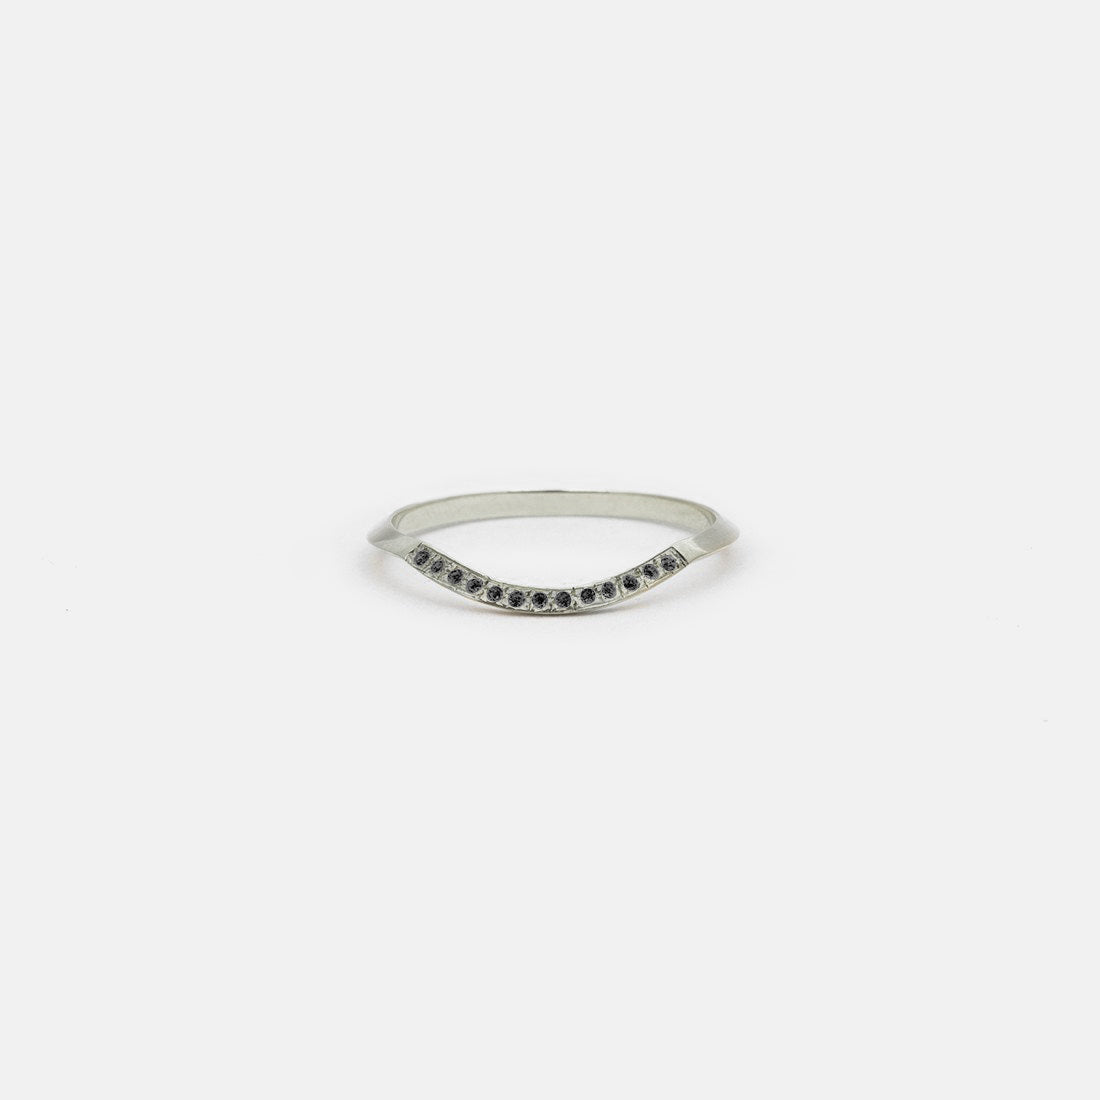 Arba Thin Ring in 14k White Gold set with Black Diamonds By SHW Fine Jewelry New York City